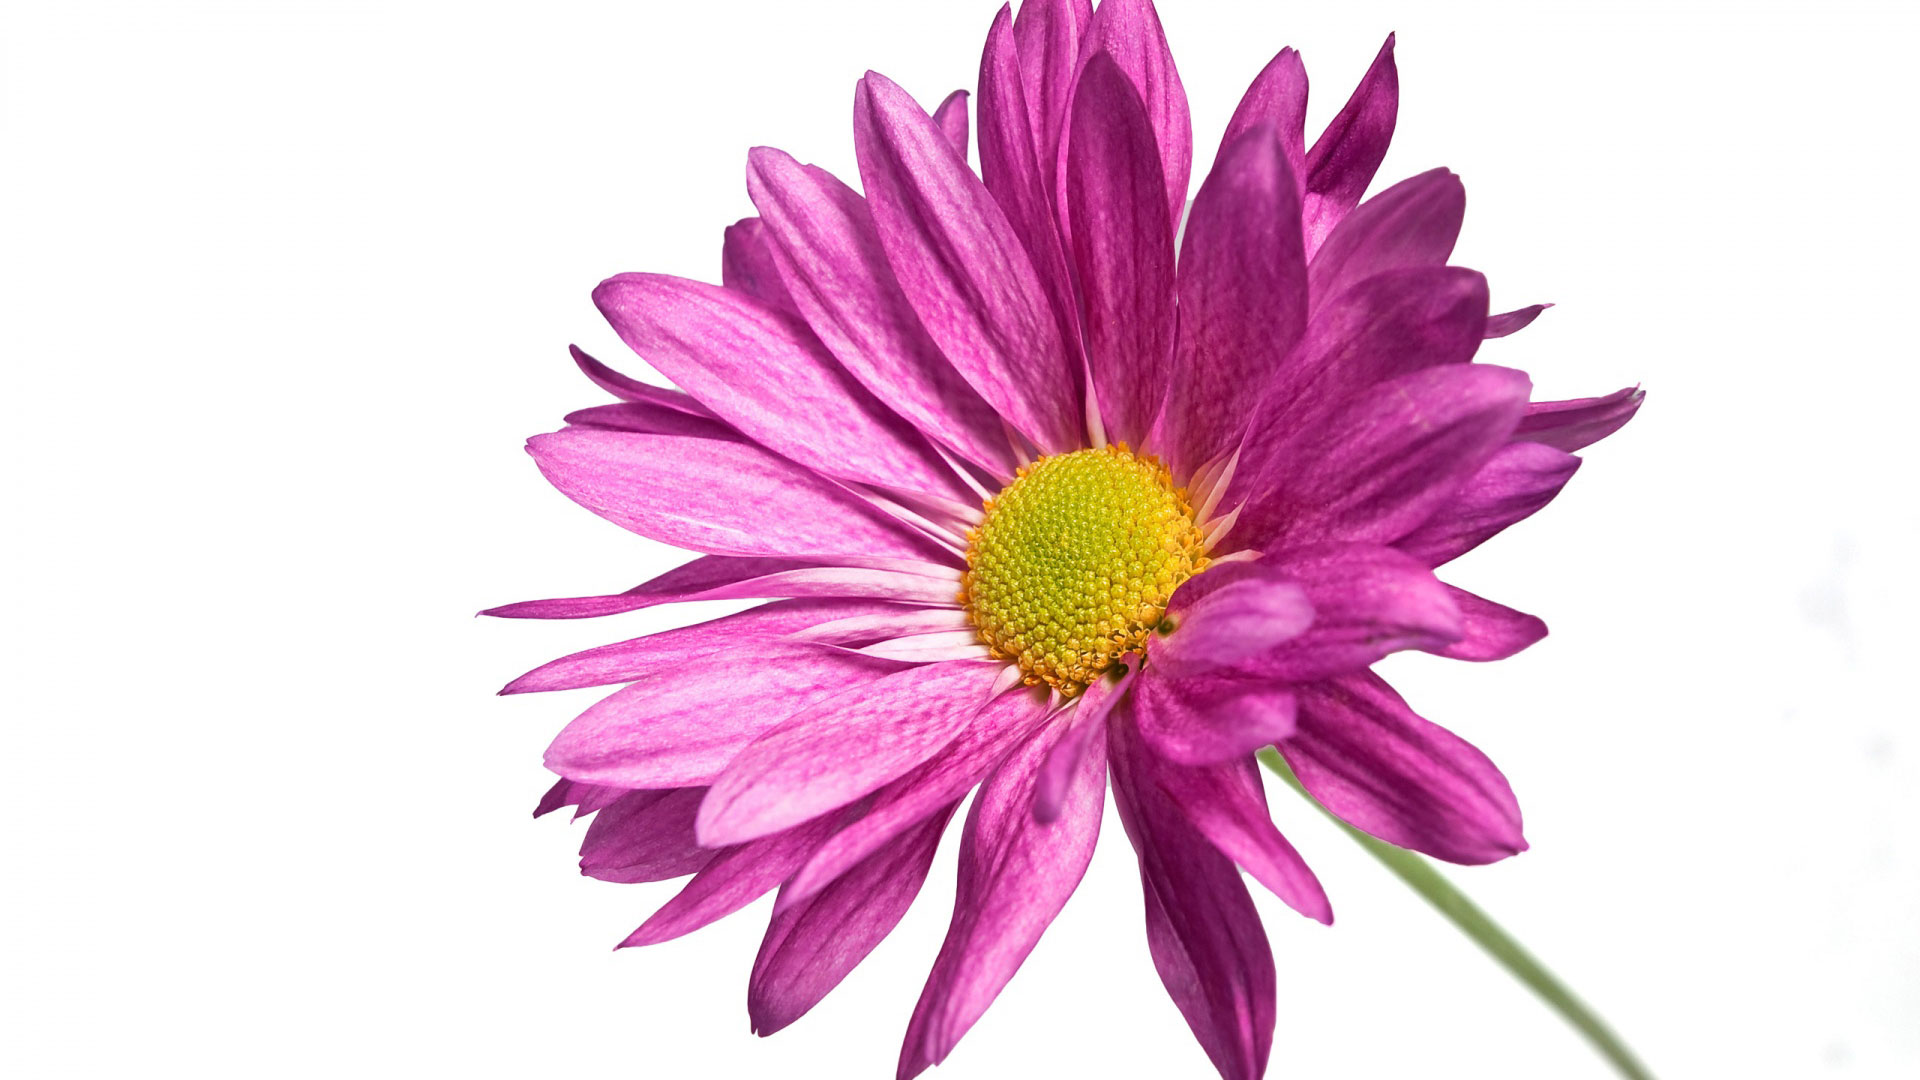 Pink Daisy 1080p Wallpapers HD Wallpapers 1920x1080